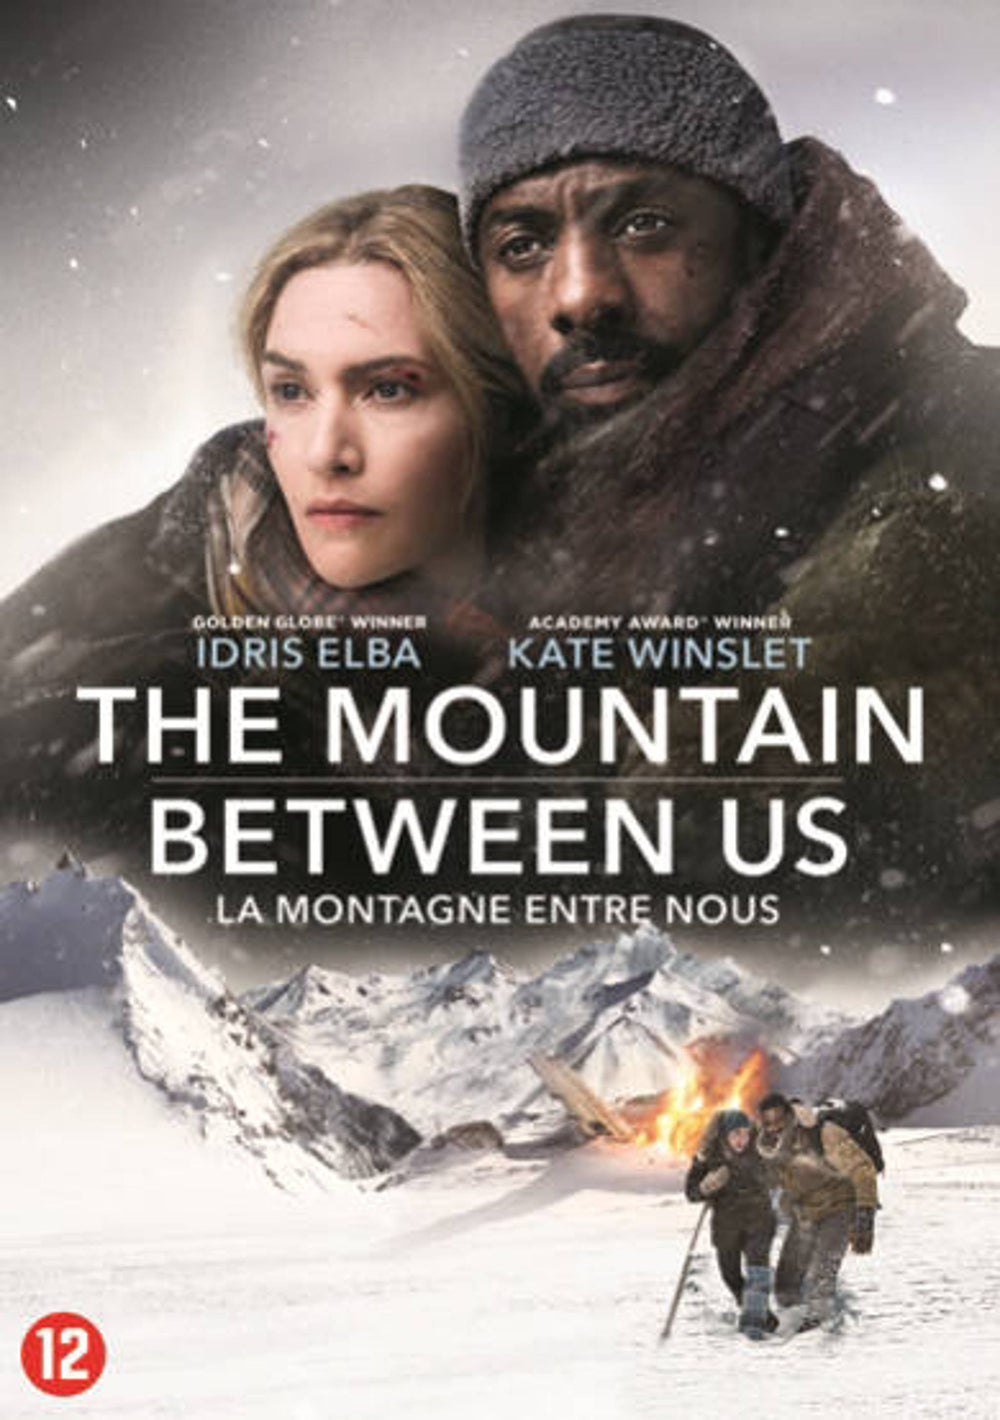 The Mountain between us (DVD)